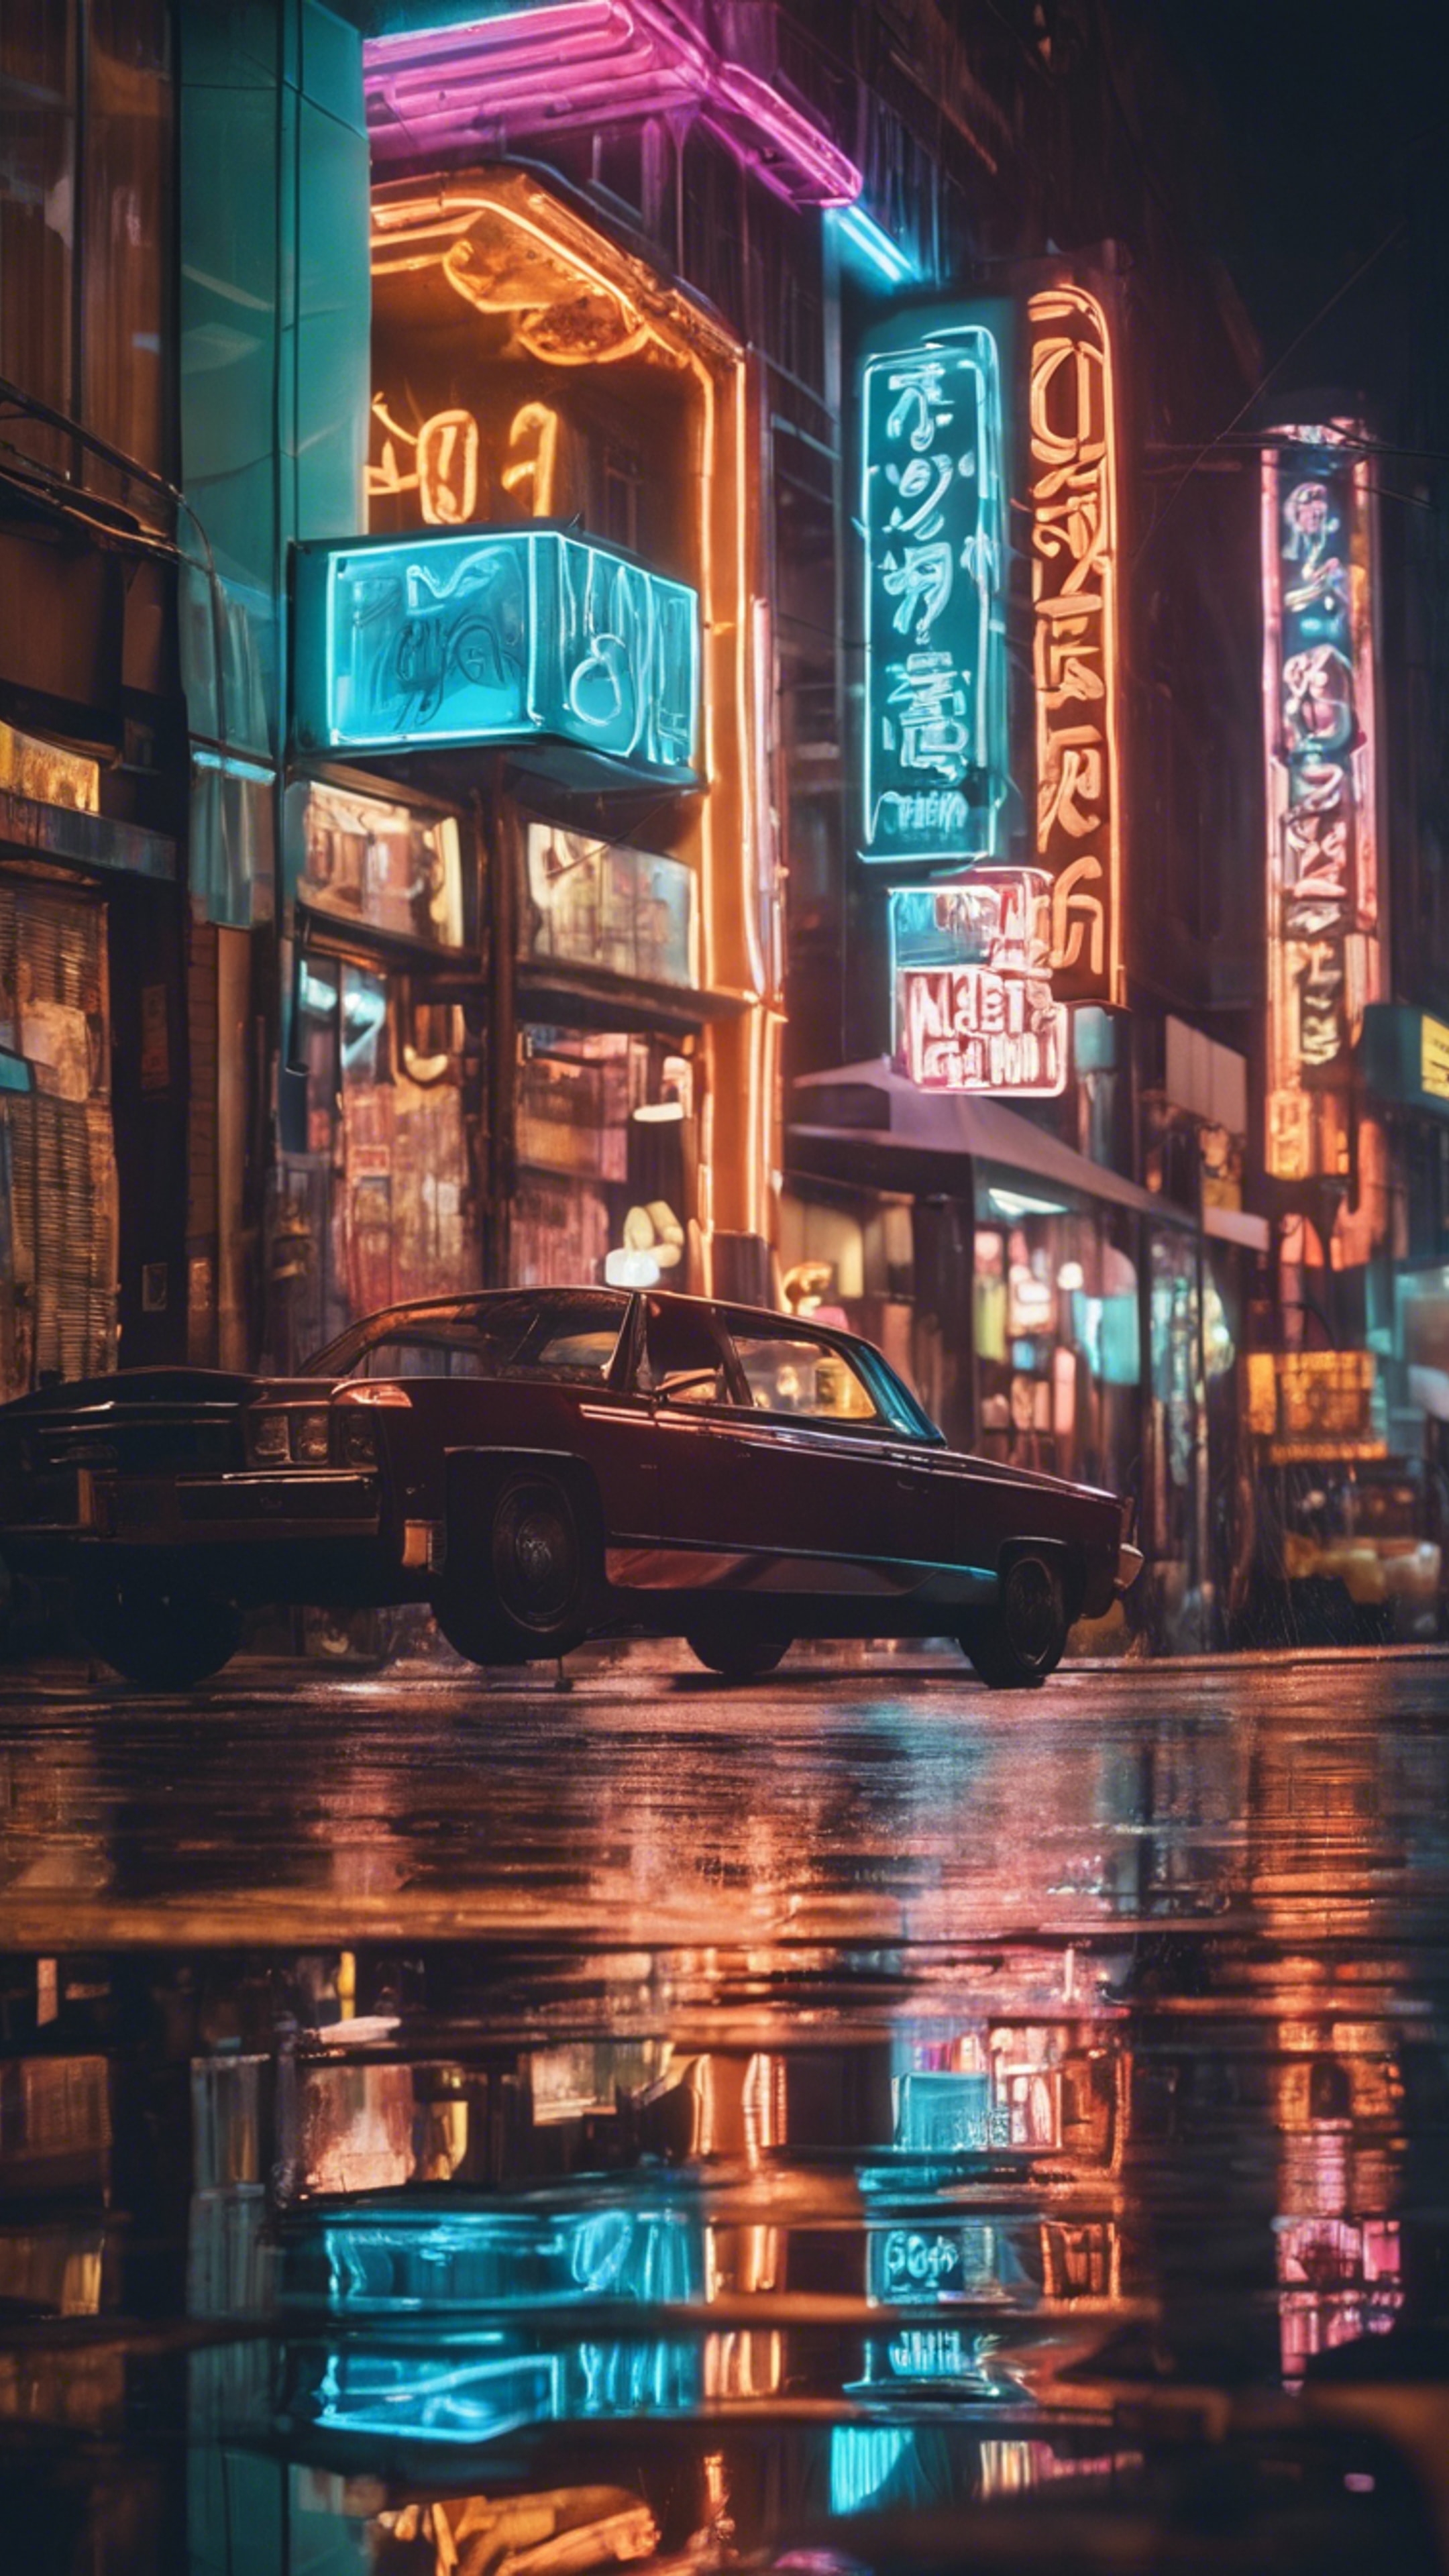 A dream vision of neon signs reflected on wet city streets at night. Hintergrund[79232e509baa4ed0a24c]